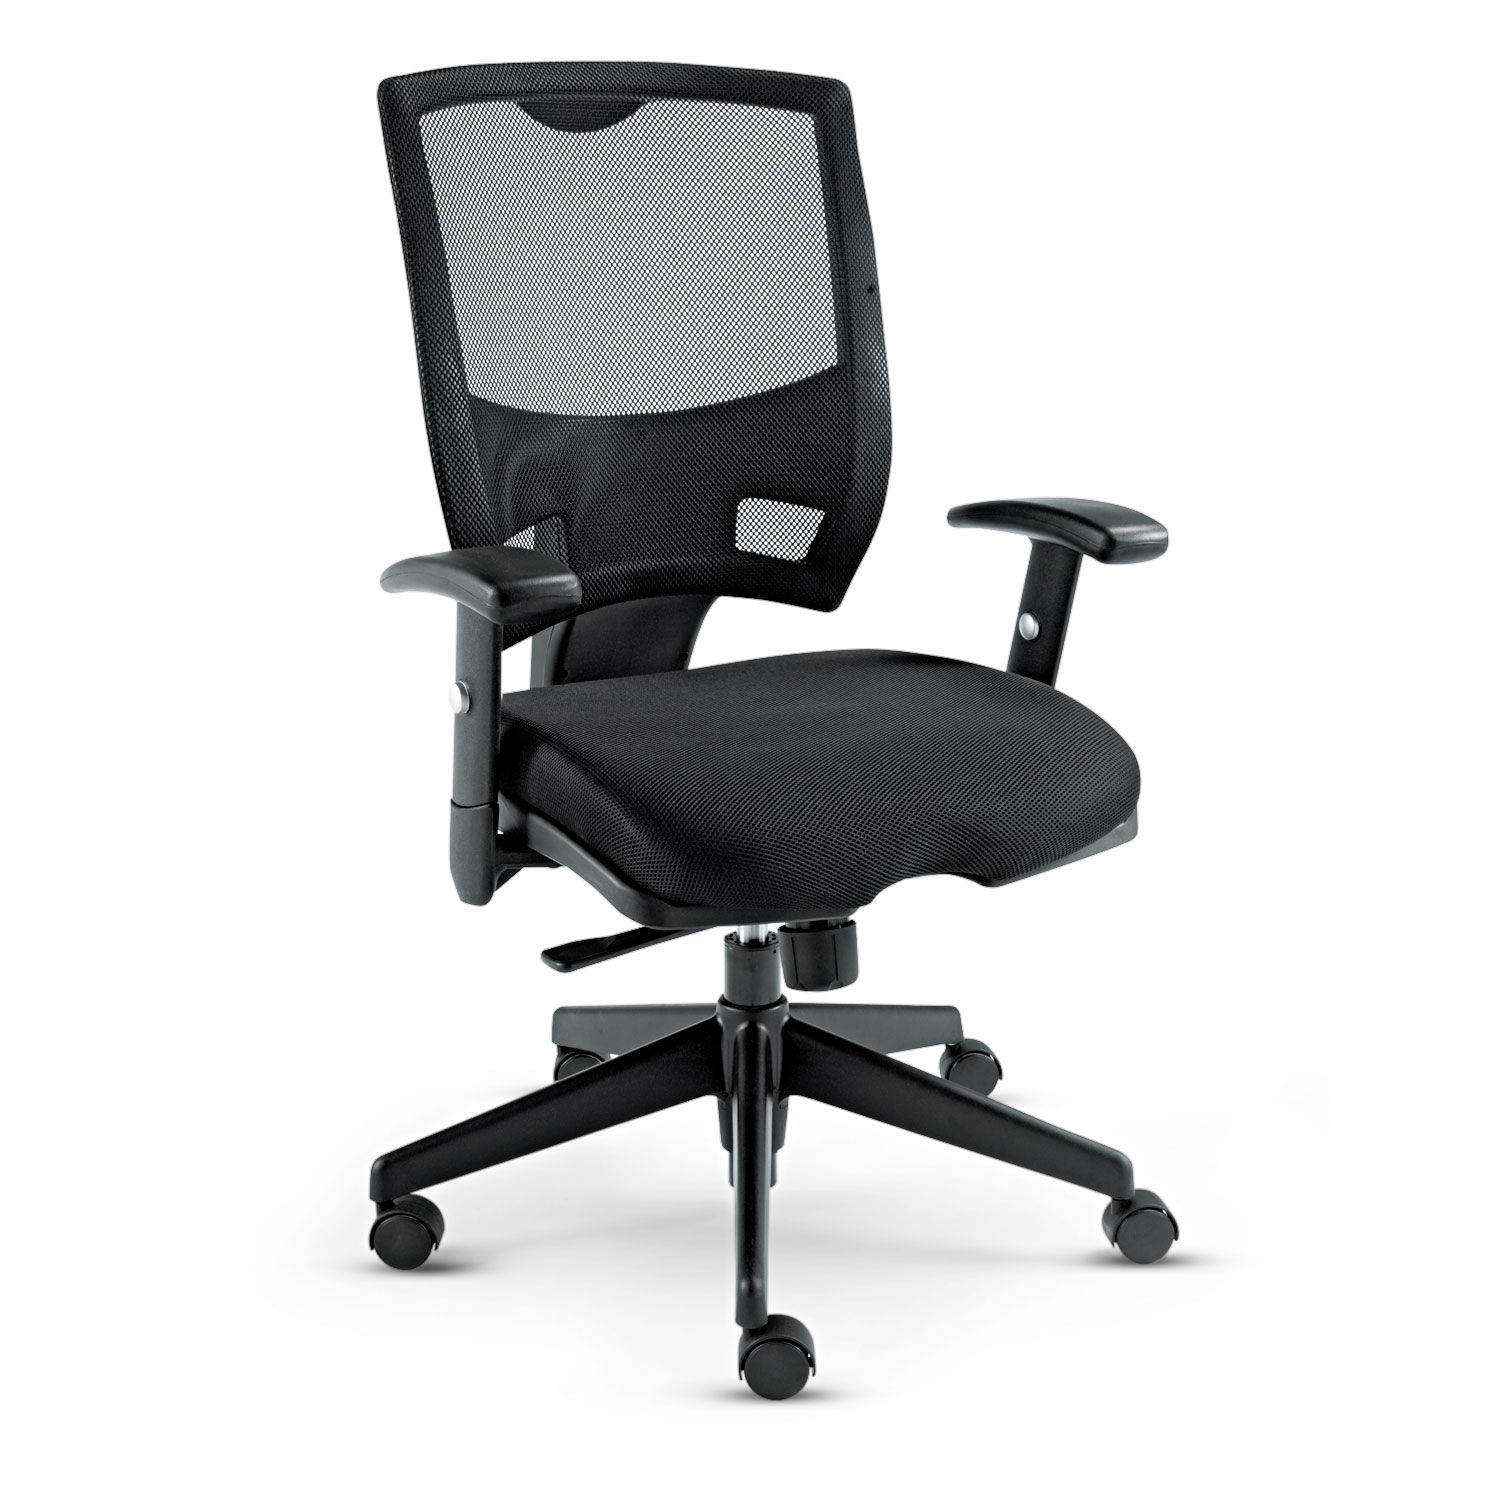 Alera Epoch Series Fabric Mesh Multifunction Chair Supports Up to 275 lb, 17.63" to 22.44" Seat Height, Black